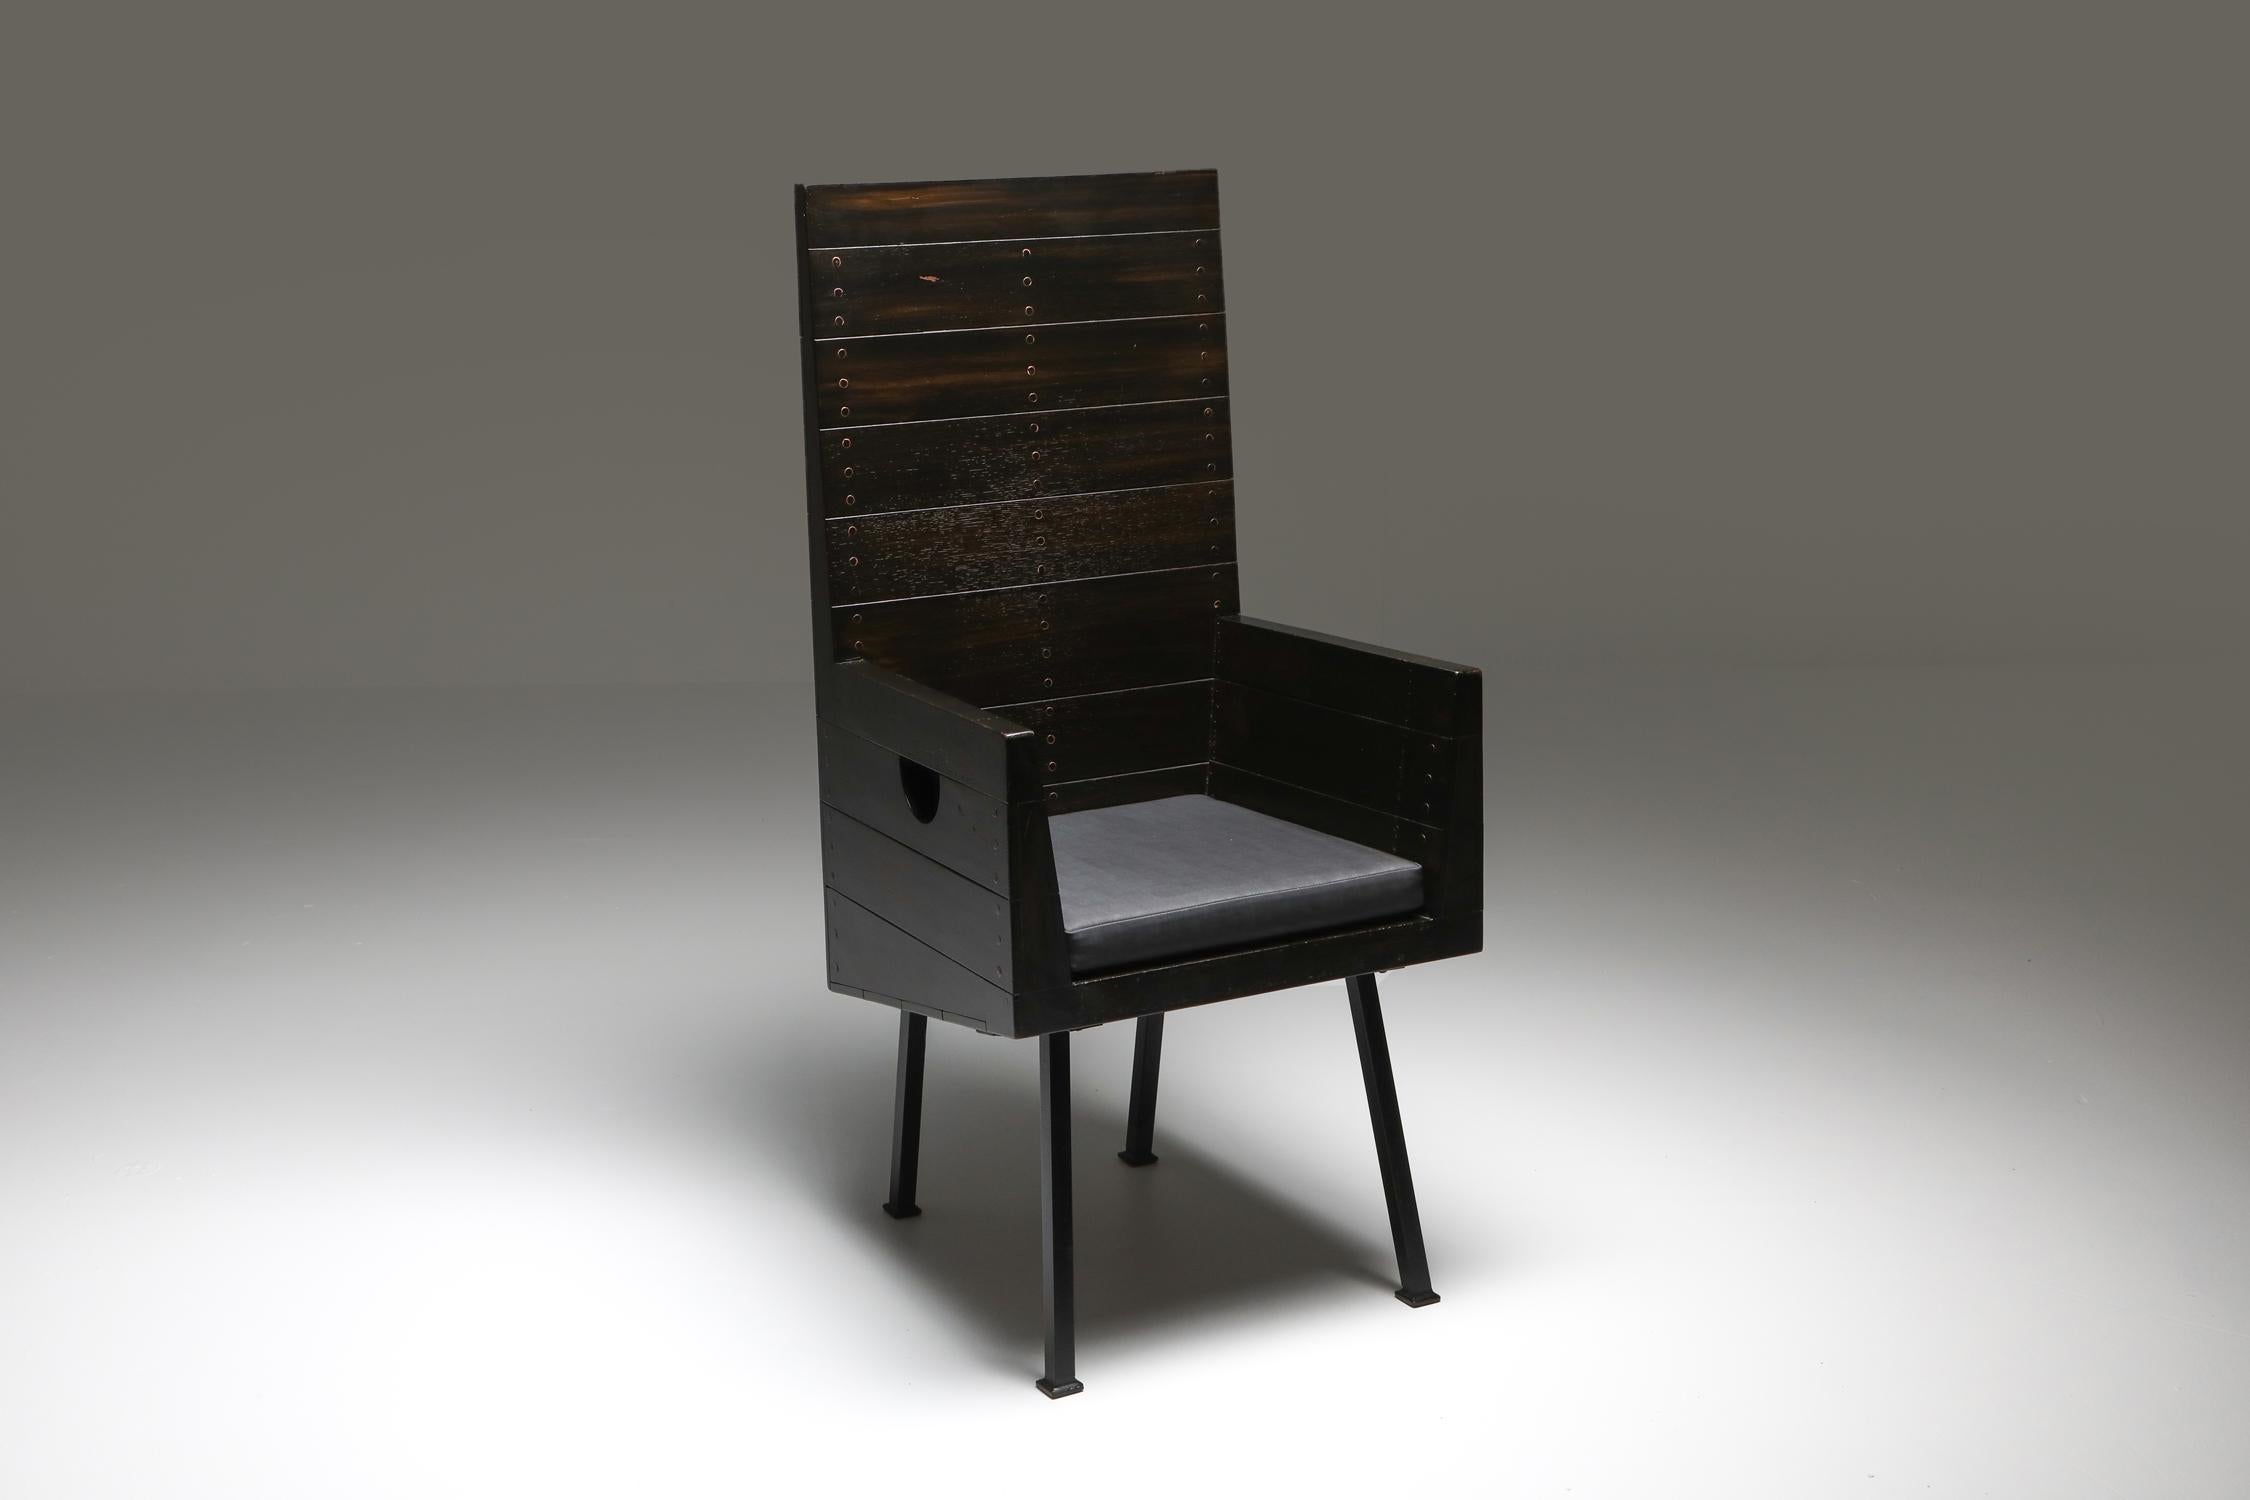 Dutch modernist chair, Dom Hans Van Der Laan, Jan De Jong, 1961, Bossche School


One of 12 ever made, from the boards room of the townhall of Budel, 1961, The Netherlands.
It was completely designed by architect Jan De Jong according to the